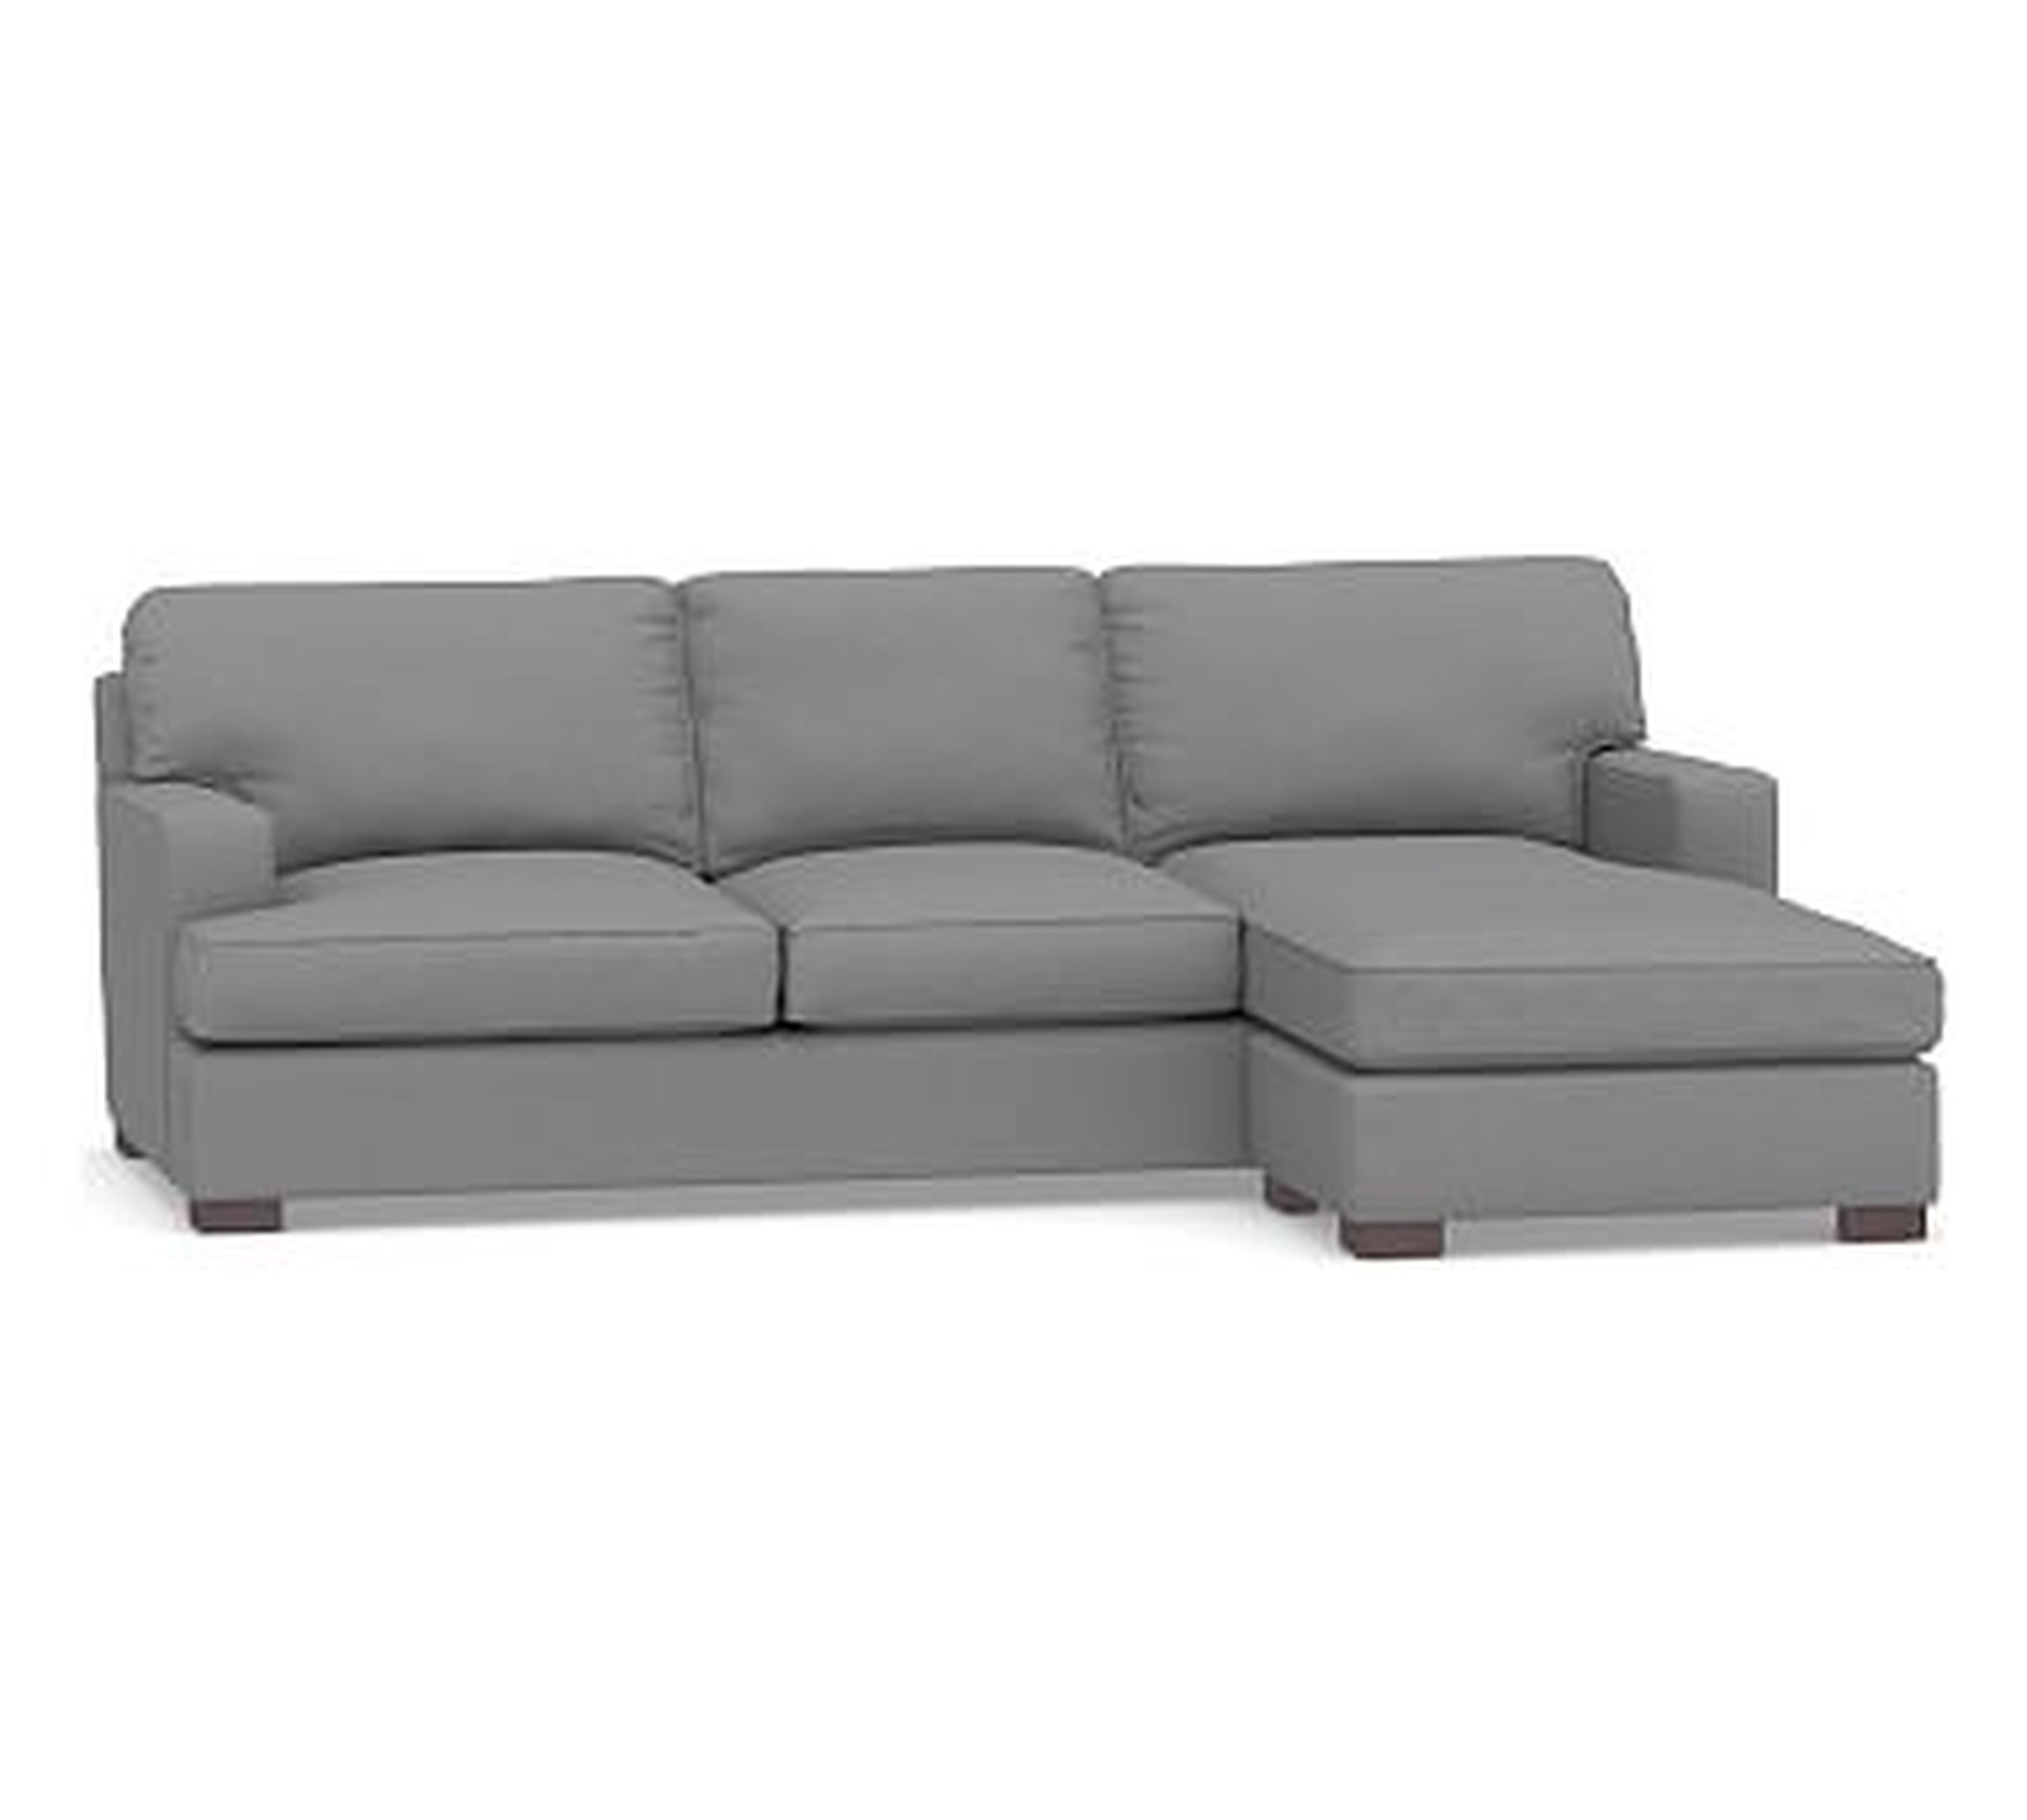 Townsend Square Arm Upholstered Sofa with Reversible Storage Chaise Sectional, Polyester Wrapped Cushions, Textured Twill Light Gray - Pottery Barn